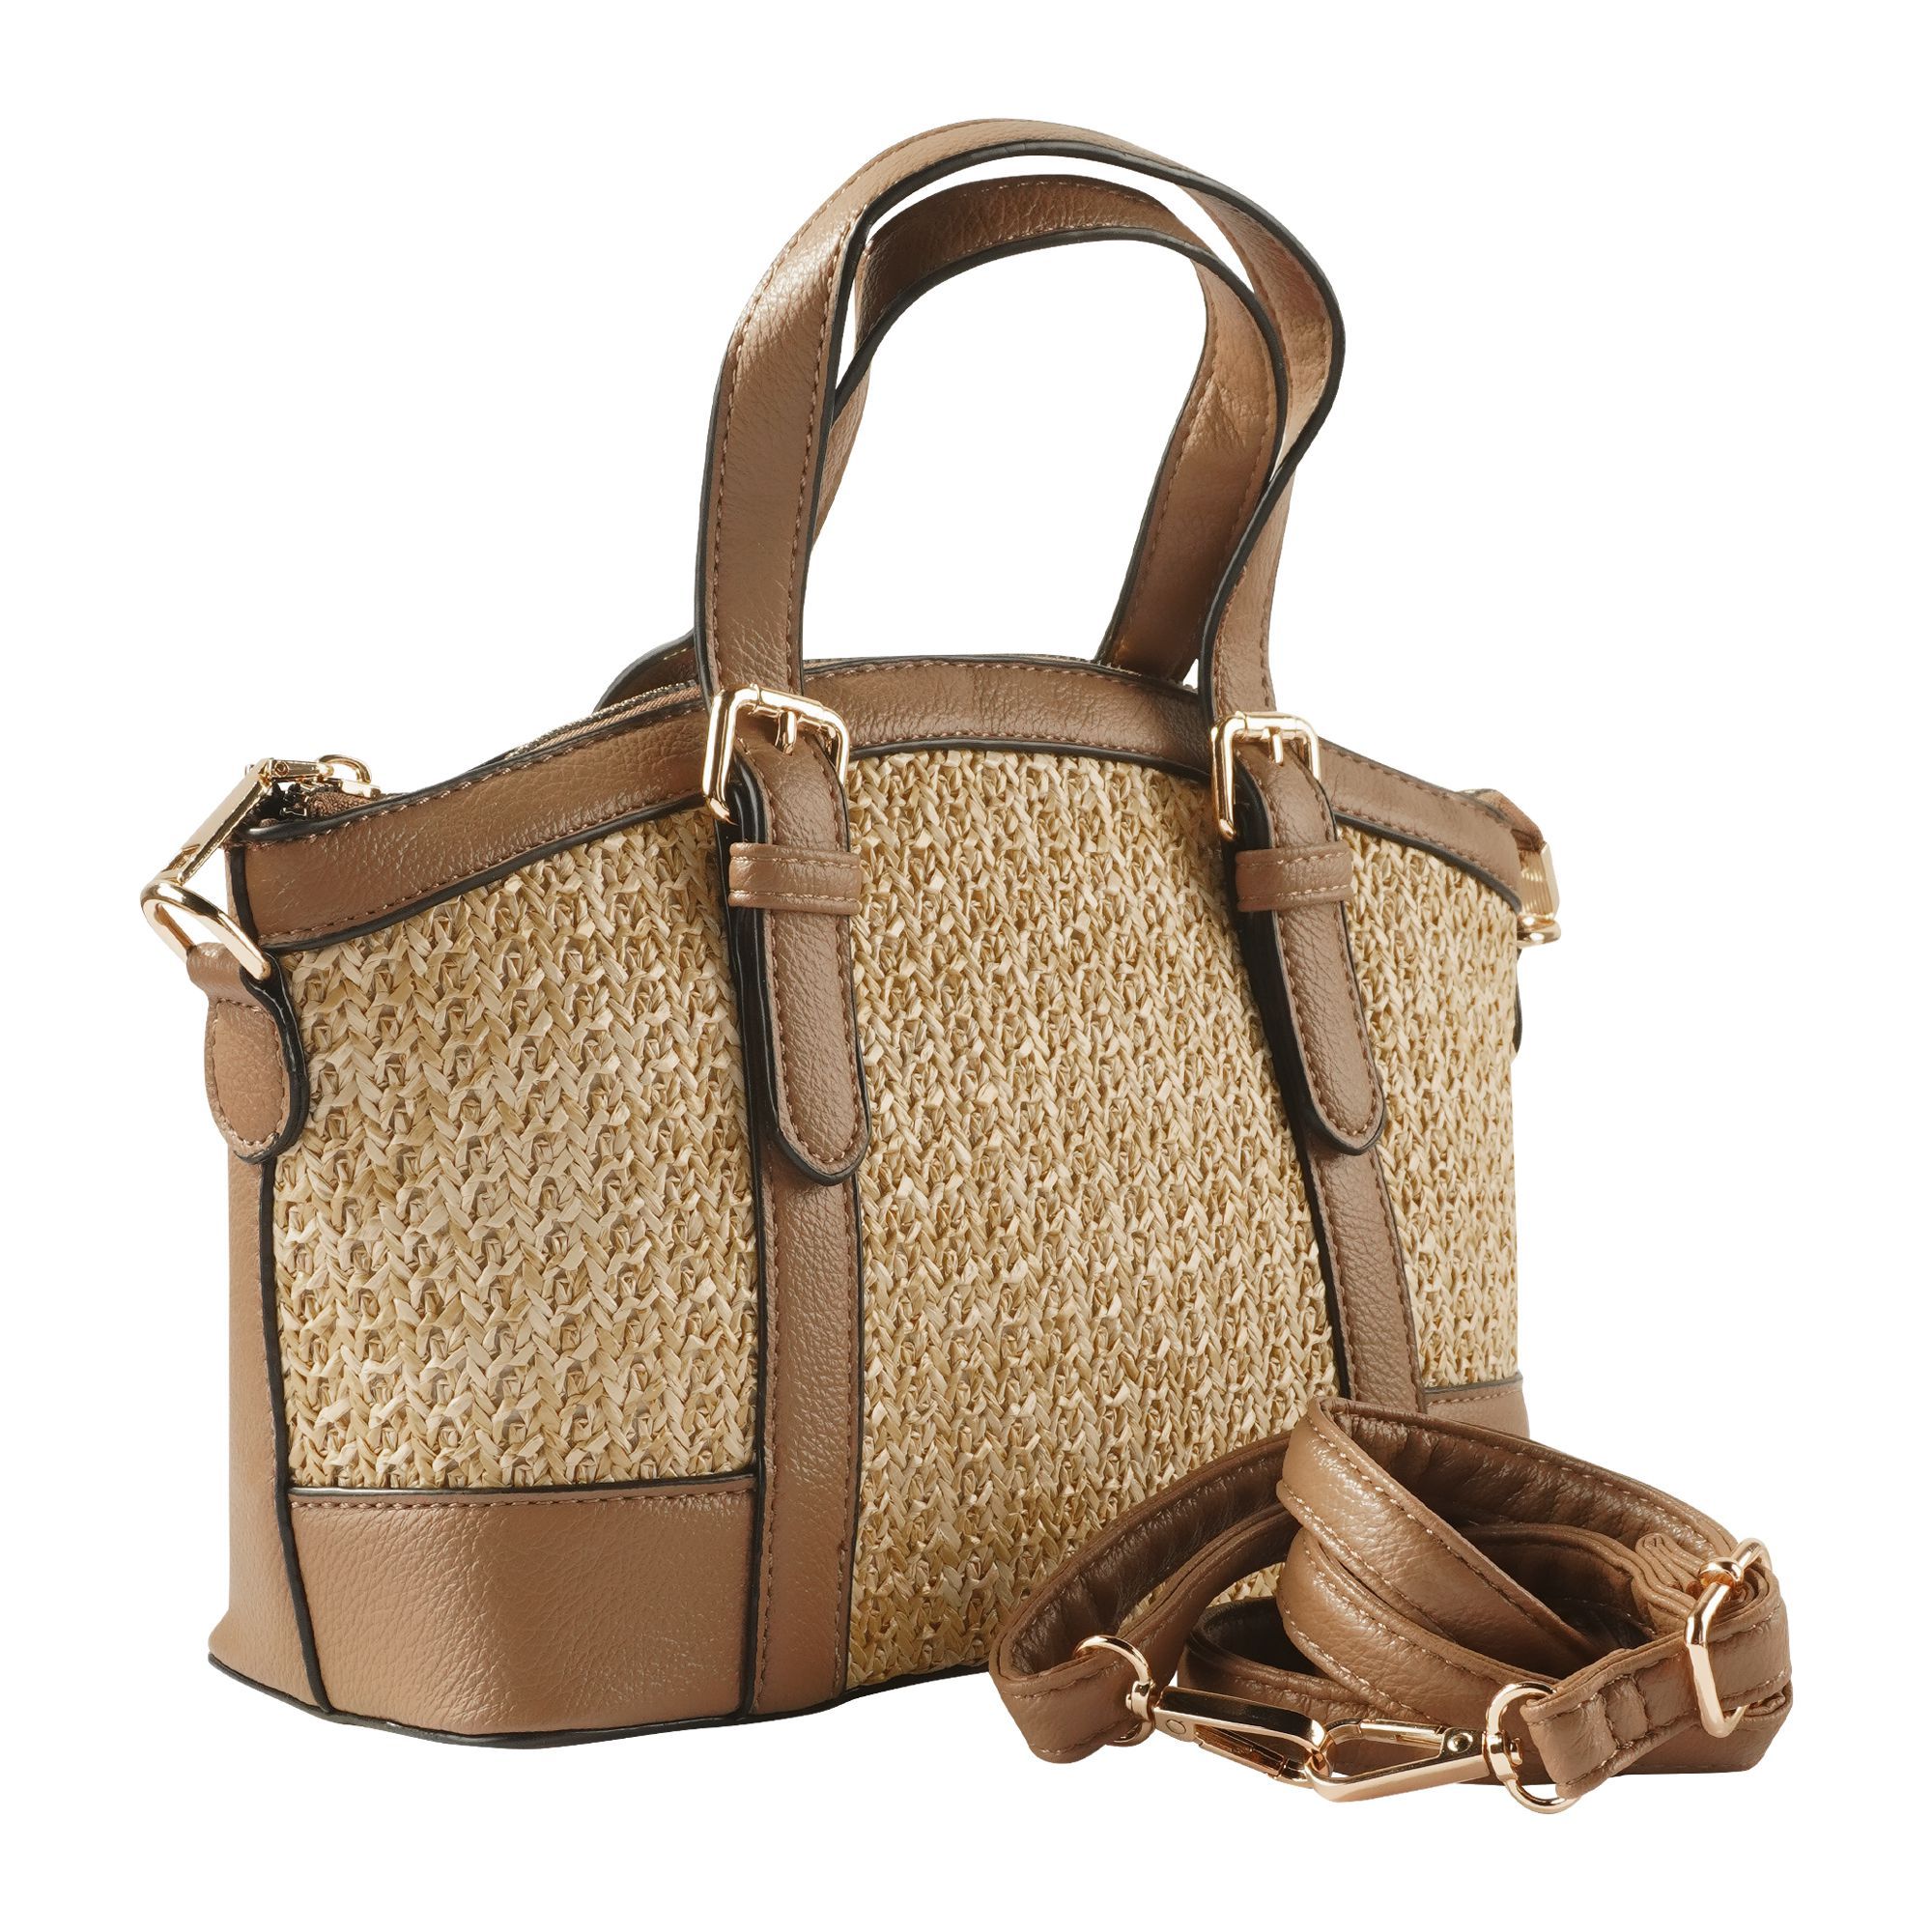 Purchase Designed Hand Bag, Khaki, 8781 Online at Special Price in ...